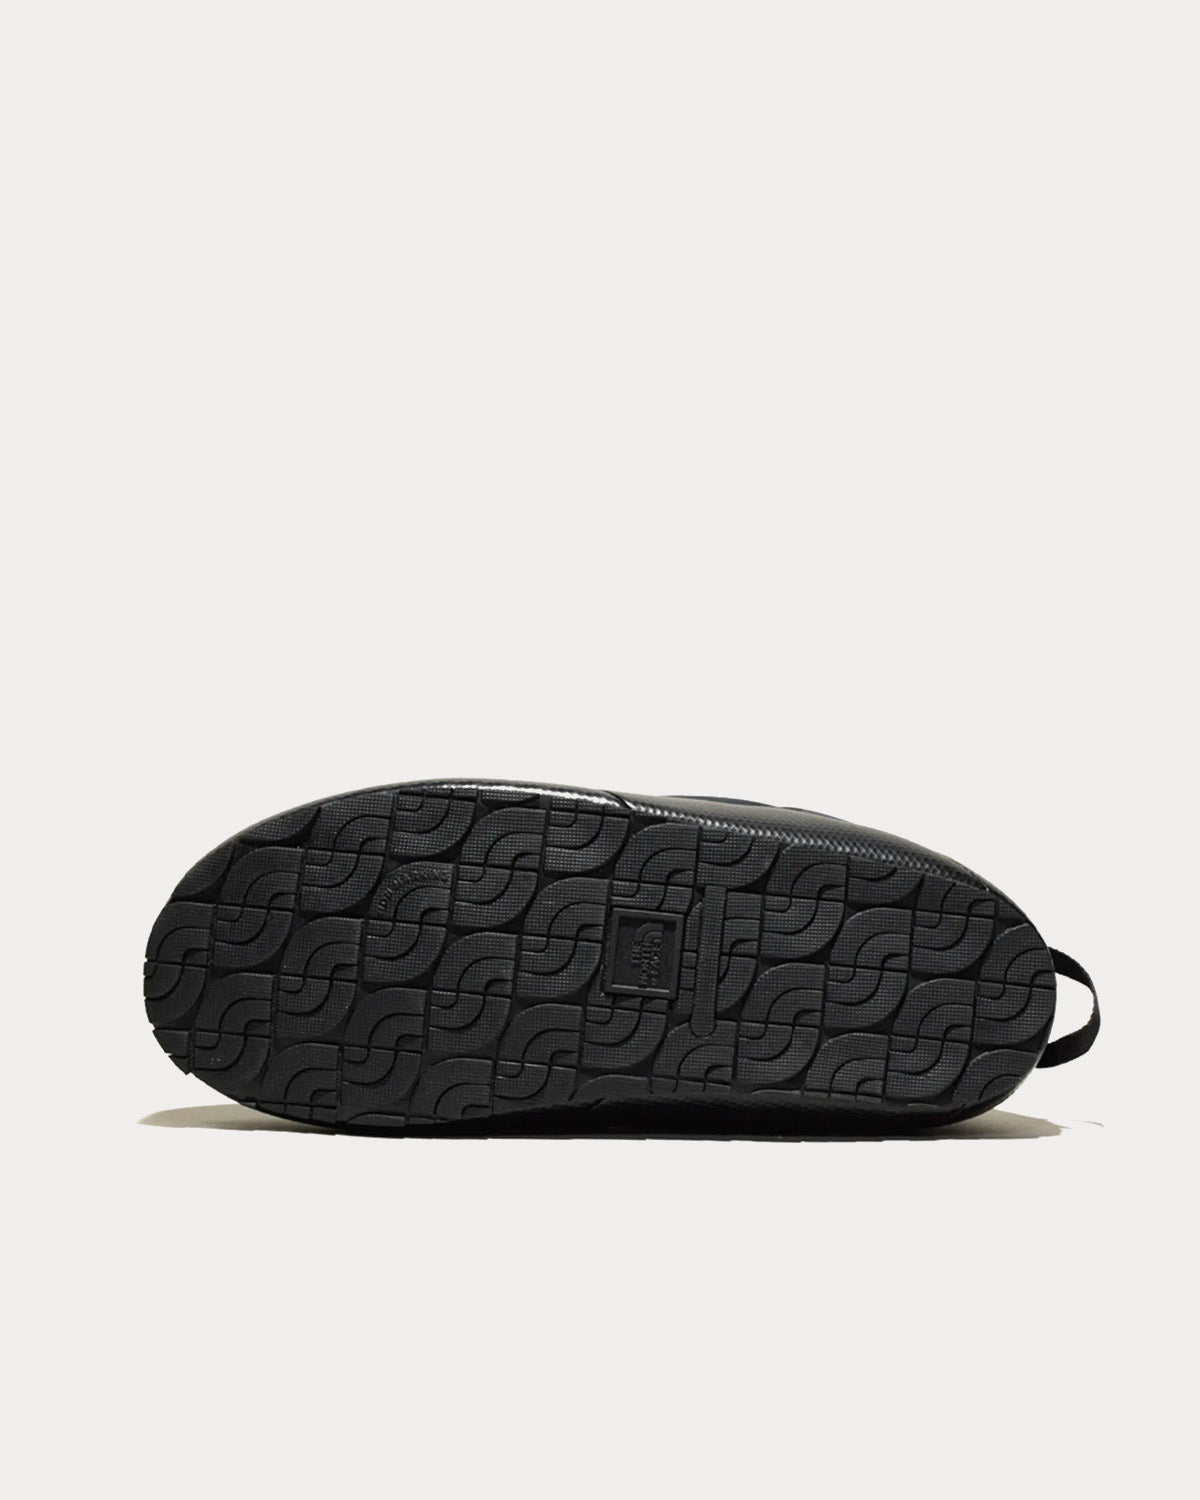 The North Face x KAWS - Thermoball Traction Mule V Black Camo Slip Ons